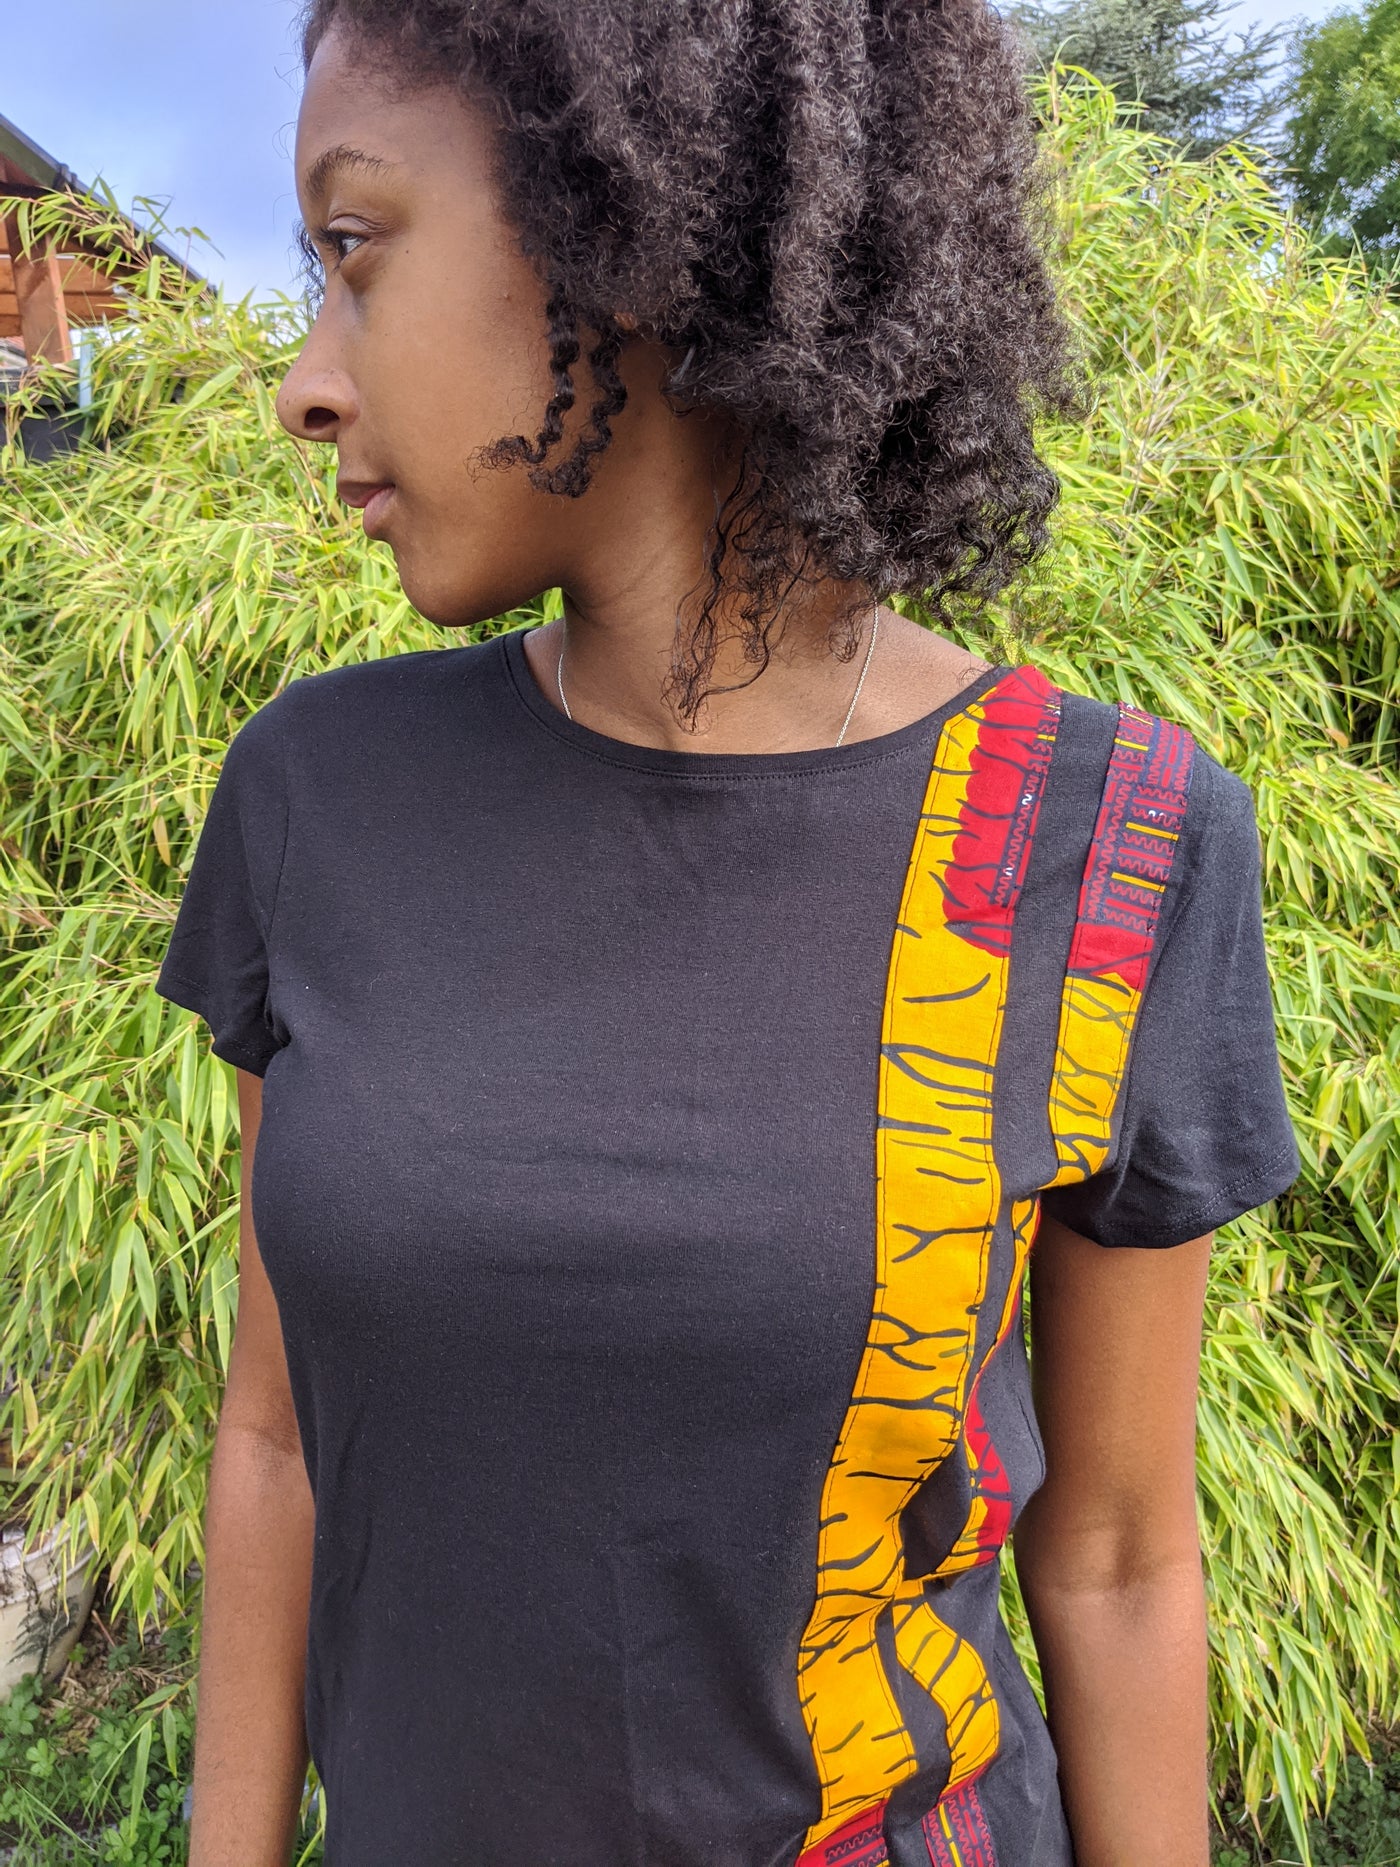 Black t-shirt with yellow and red Kente stripes